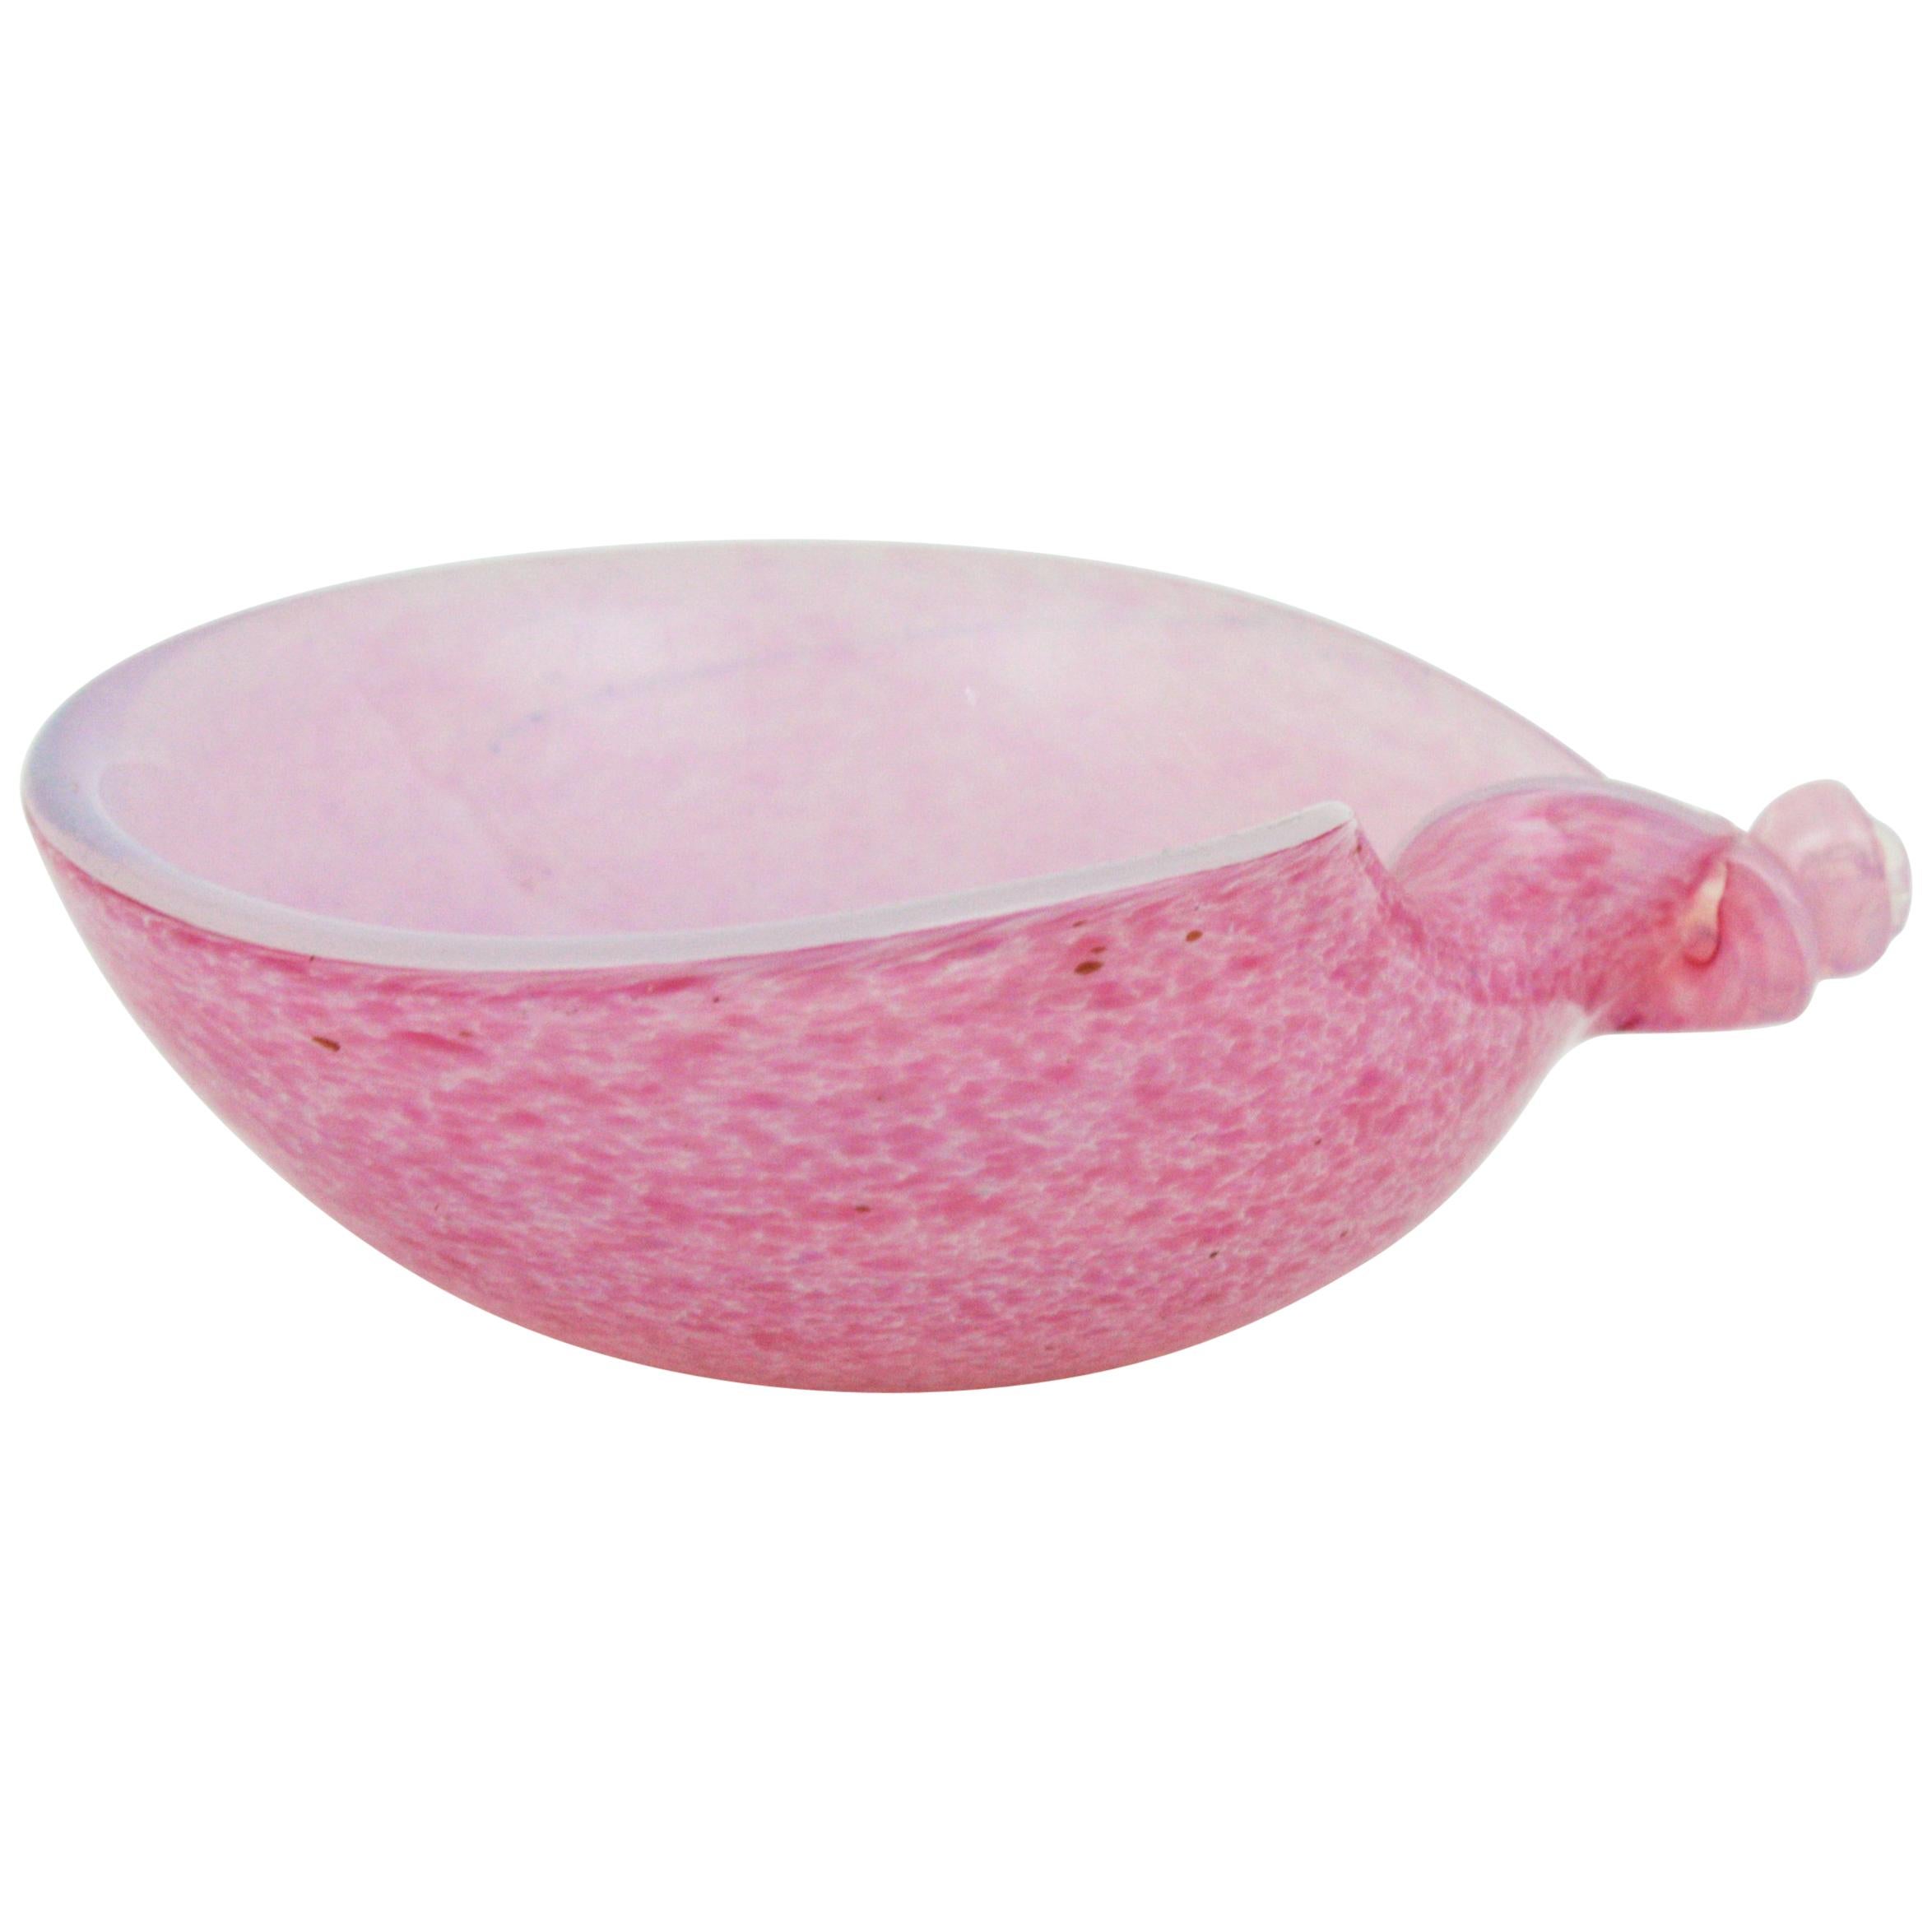 Lovely Murano hand blown pink over opaline white glass sea shell bowl / ashtray. Attributed to Archimede Seguso, Italy, 1960s.
This decorative dish or bowl will be perfect as a gift idea. Use it as candy bowl, ashtray, jewelry bowl or vide-poche.